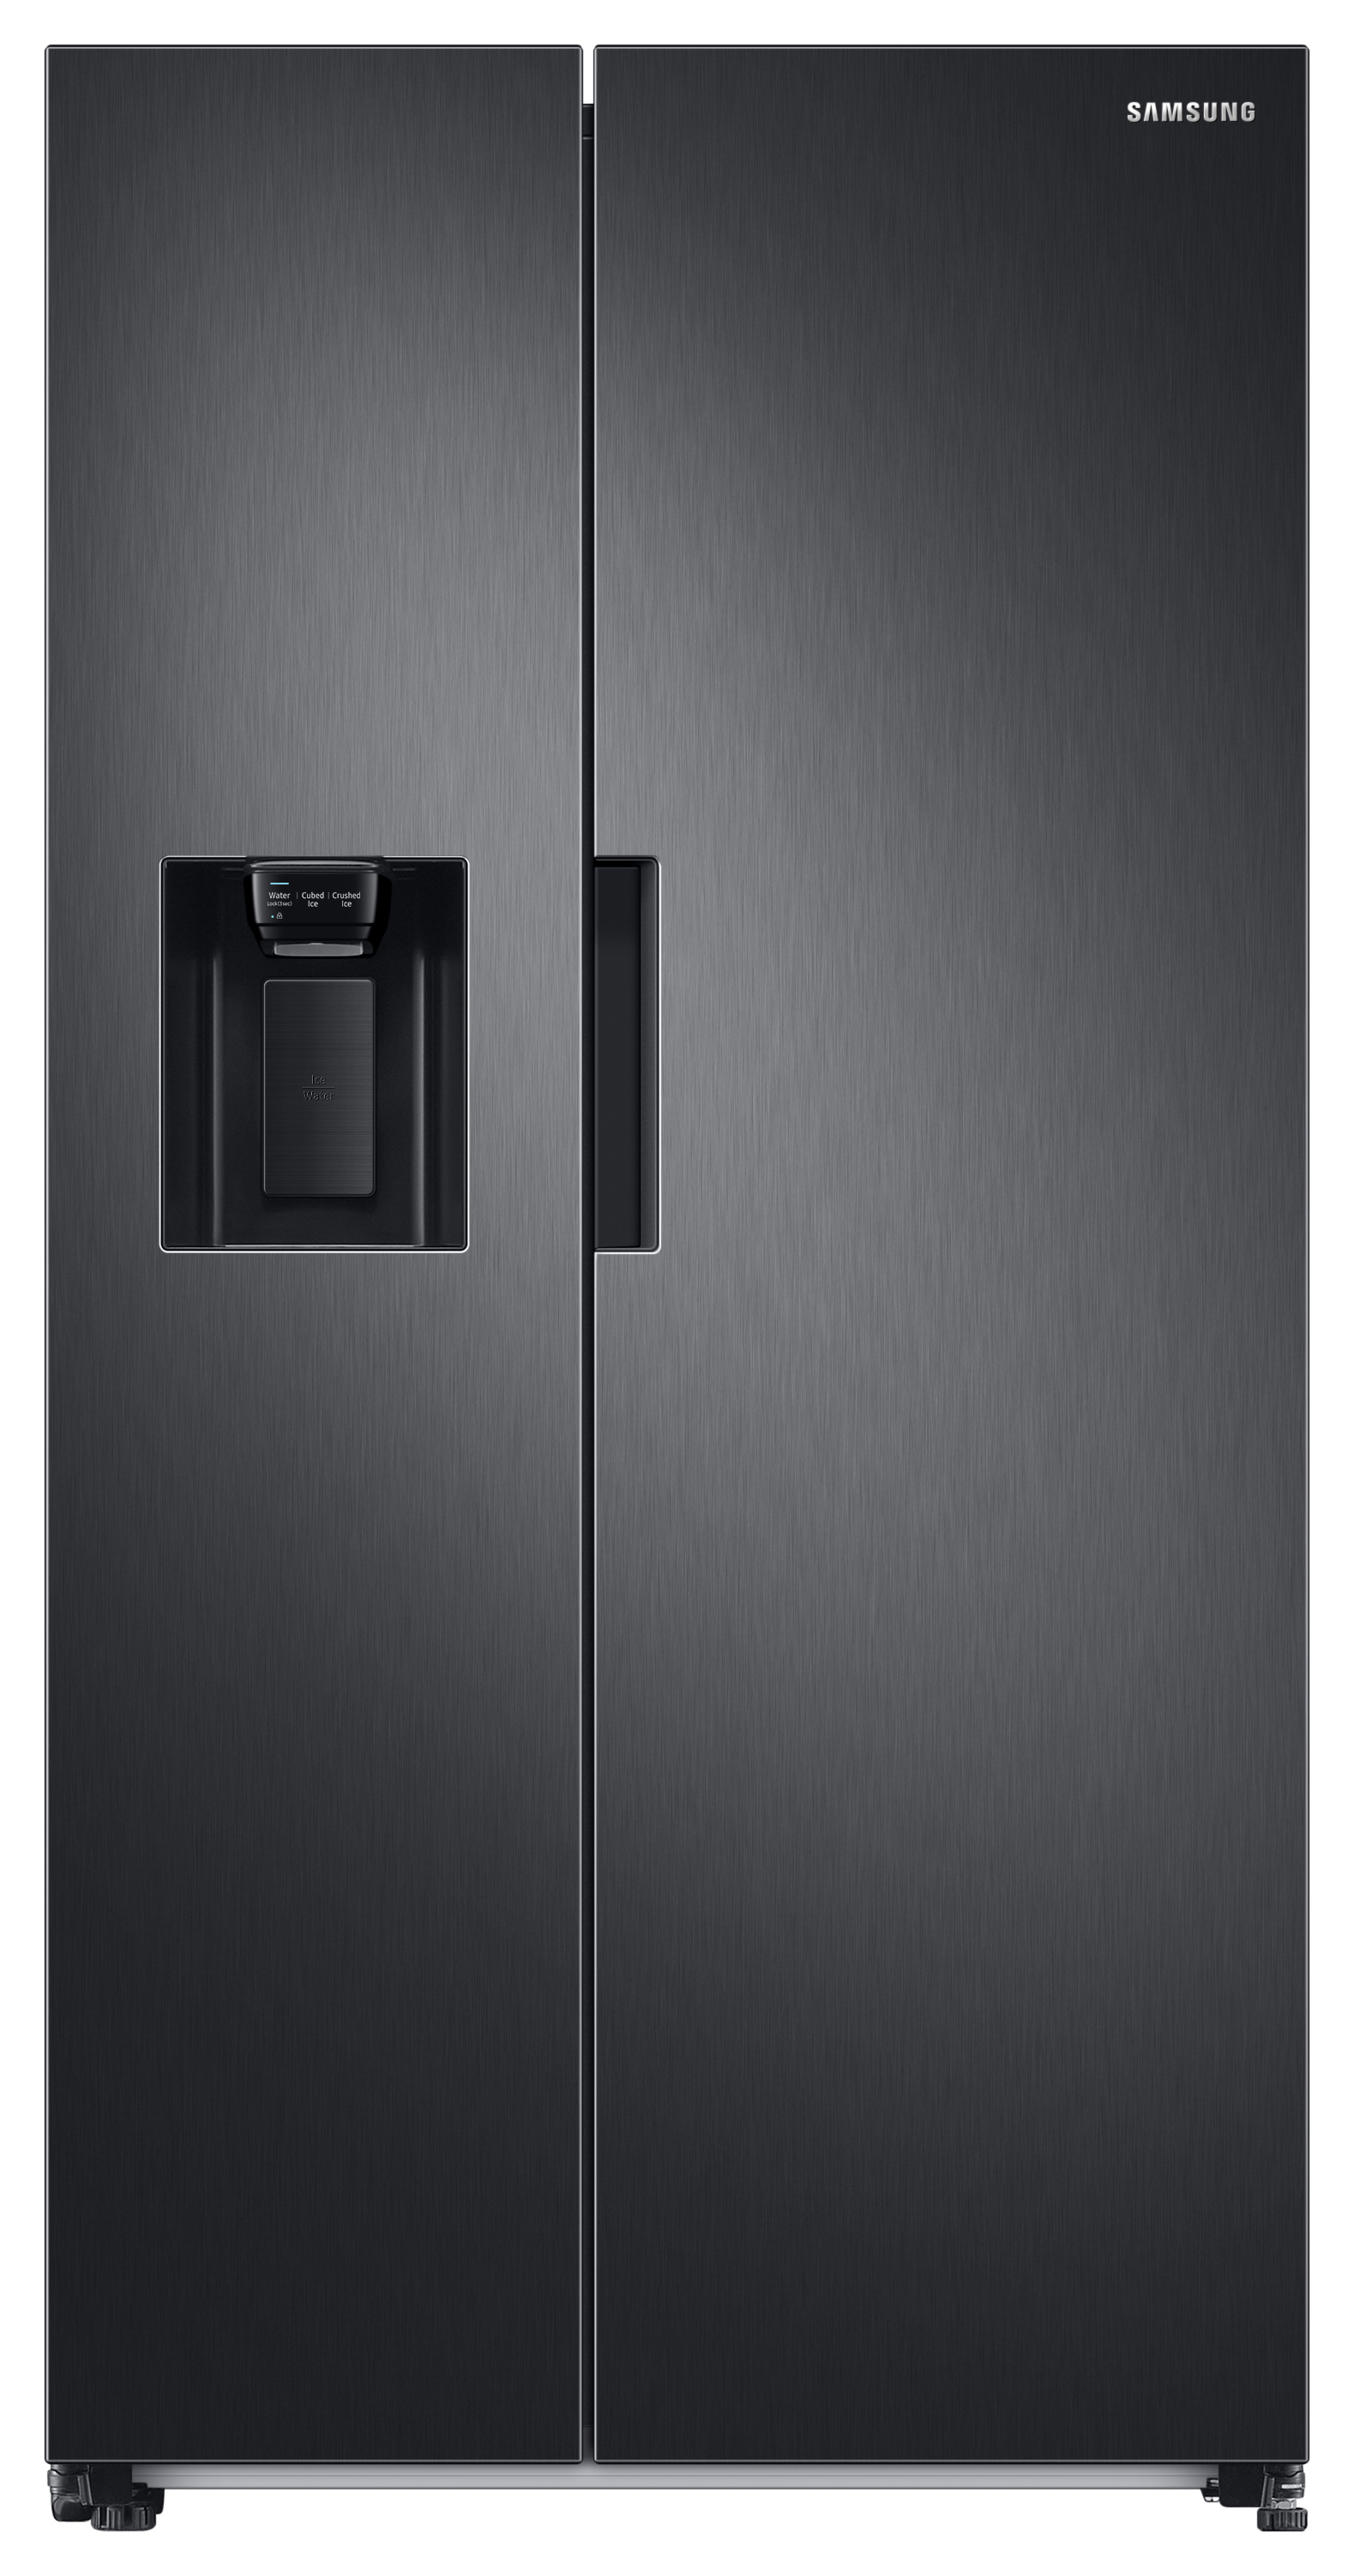 Samsung RS67A8811B1/EU Water & Ice Dispenser E-Rated American Style Fridge Freezer - Black Stainless